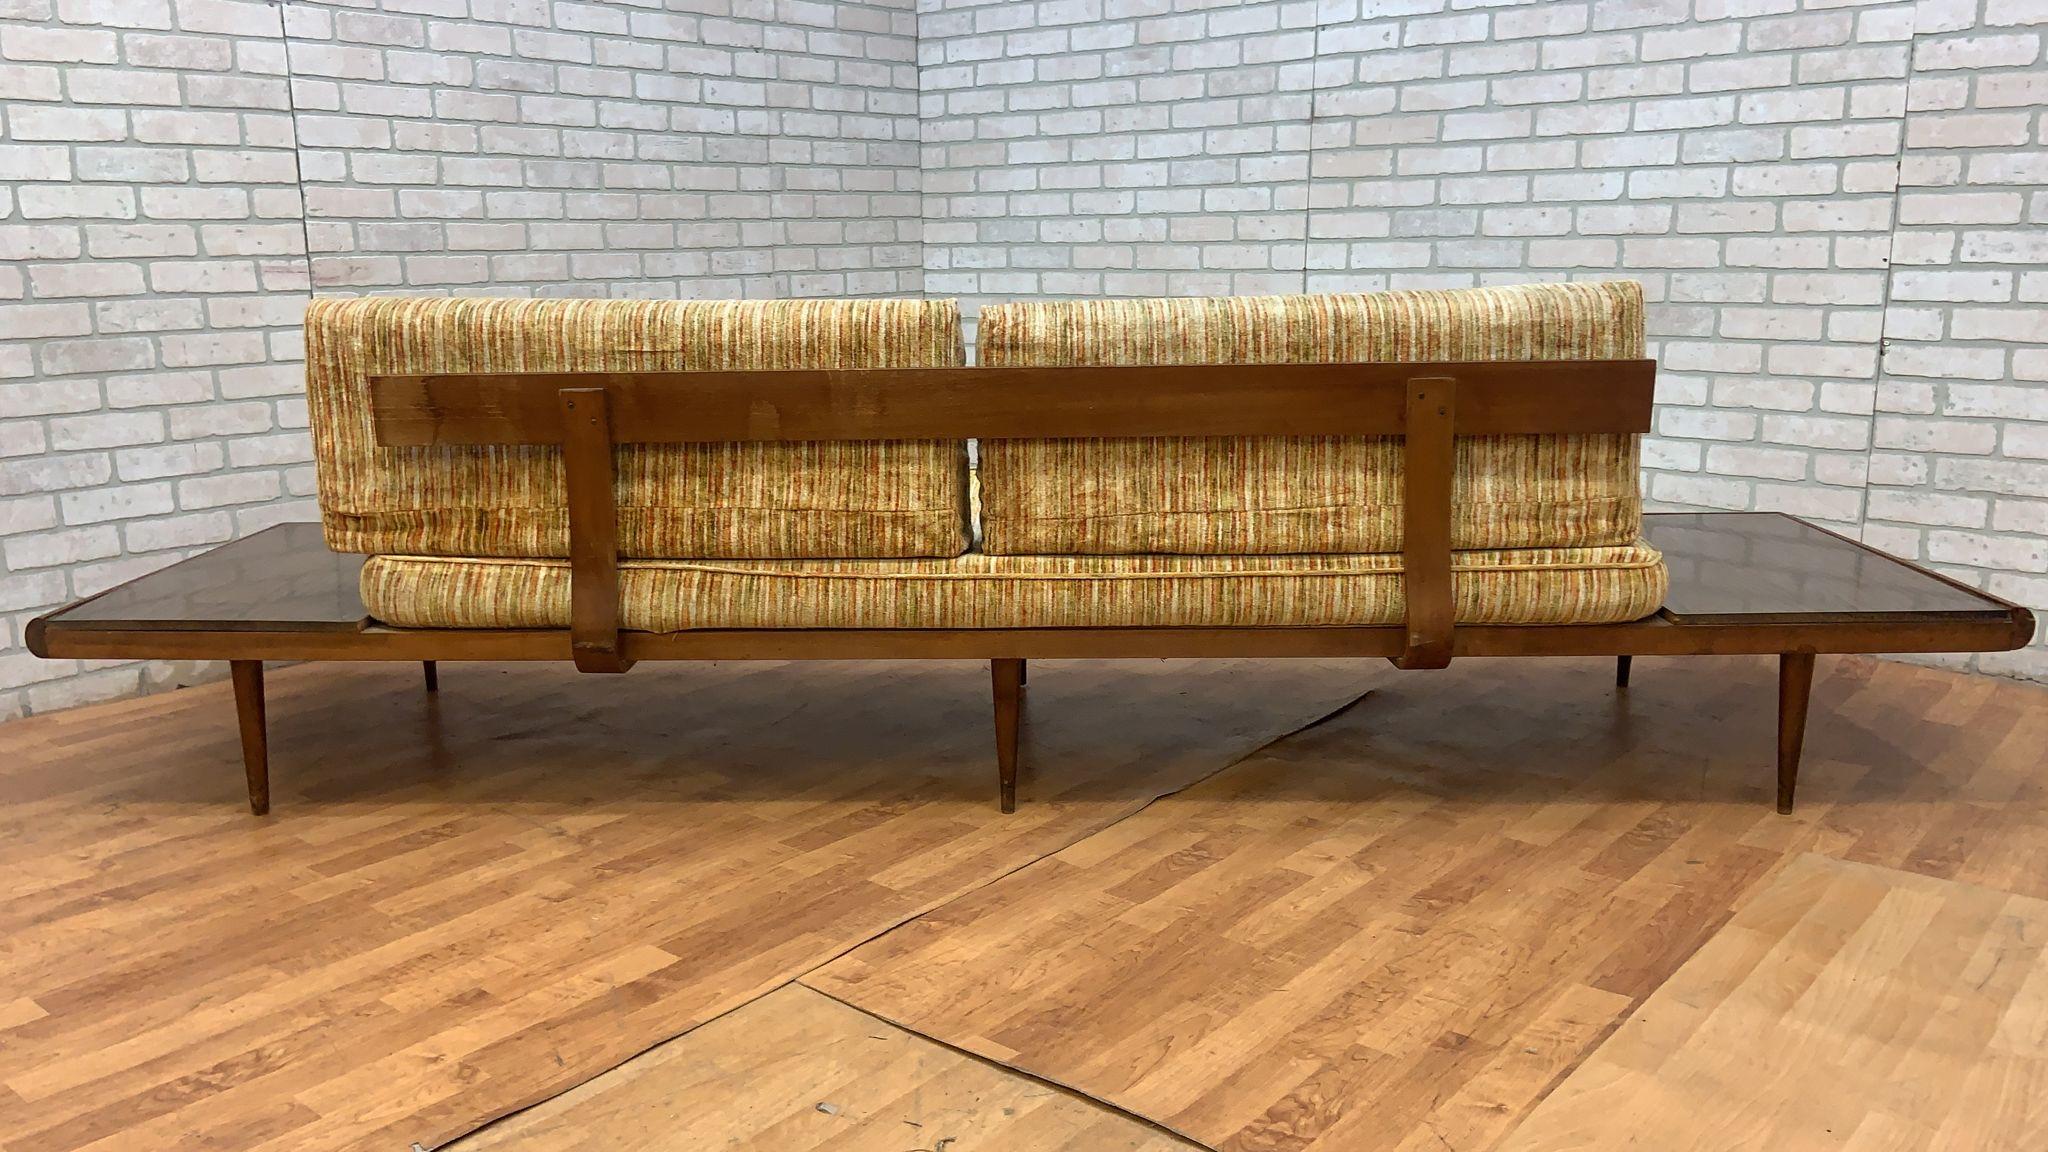 Mid Century Modern Adrian Pearsall Oak Daybed Sofa with Floating End Tables

This 20th Century Adrian Pearsall Oak Daybed Sofa has a built-in floating maple end tables extending like wings off the frame. The solid oak frame and support bands are in